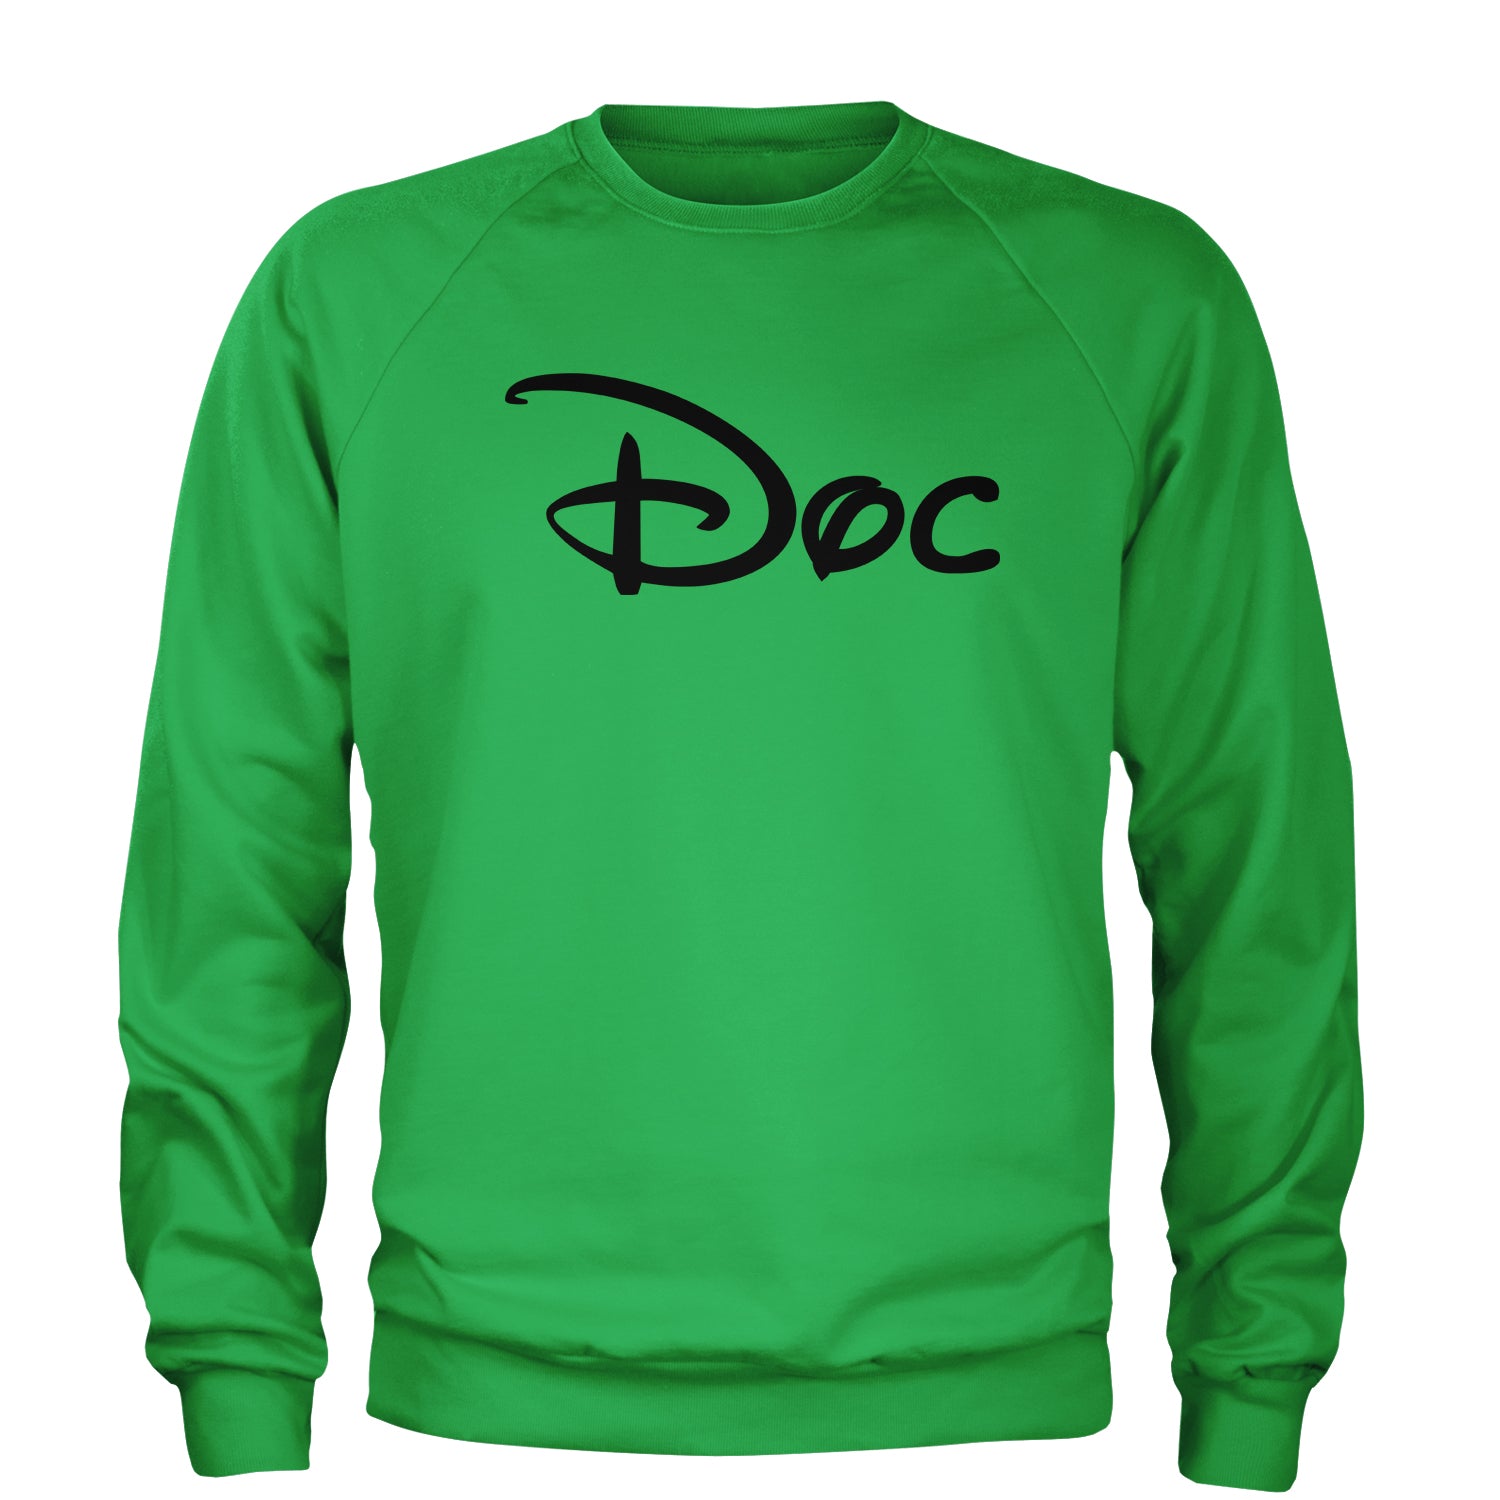 Doc - 7 Dwarfs Costume Adult Crewneck Sweatshirt and, costume, dwarfs, group, halloween, matching, seven, snow, the, white by Expression Tees